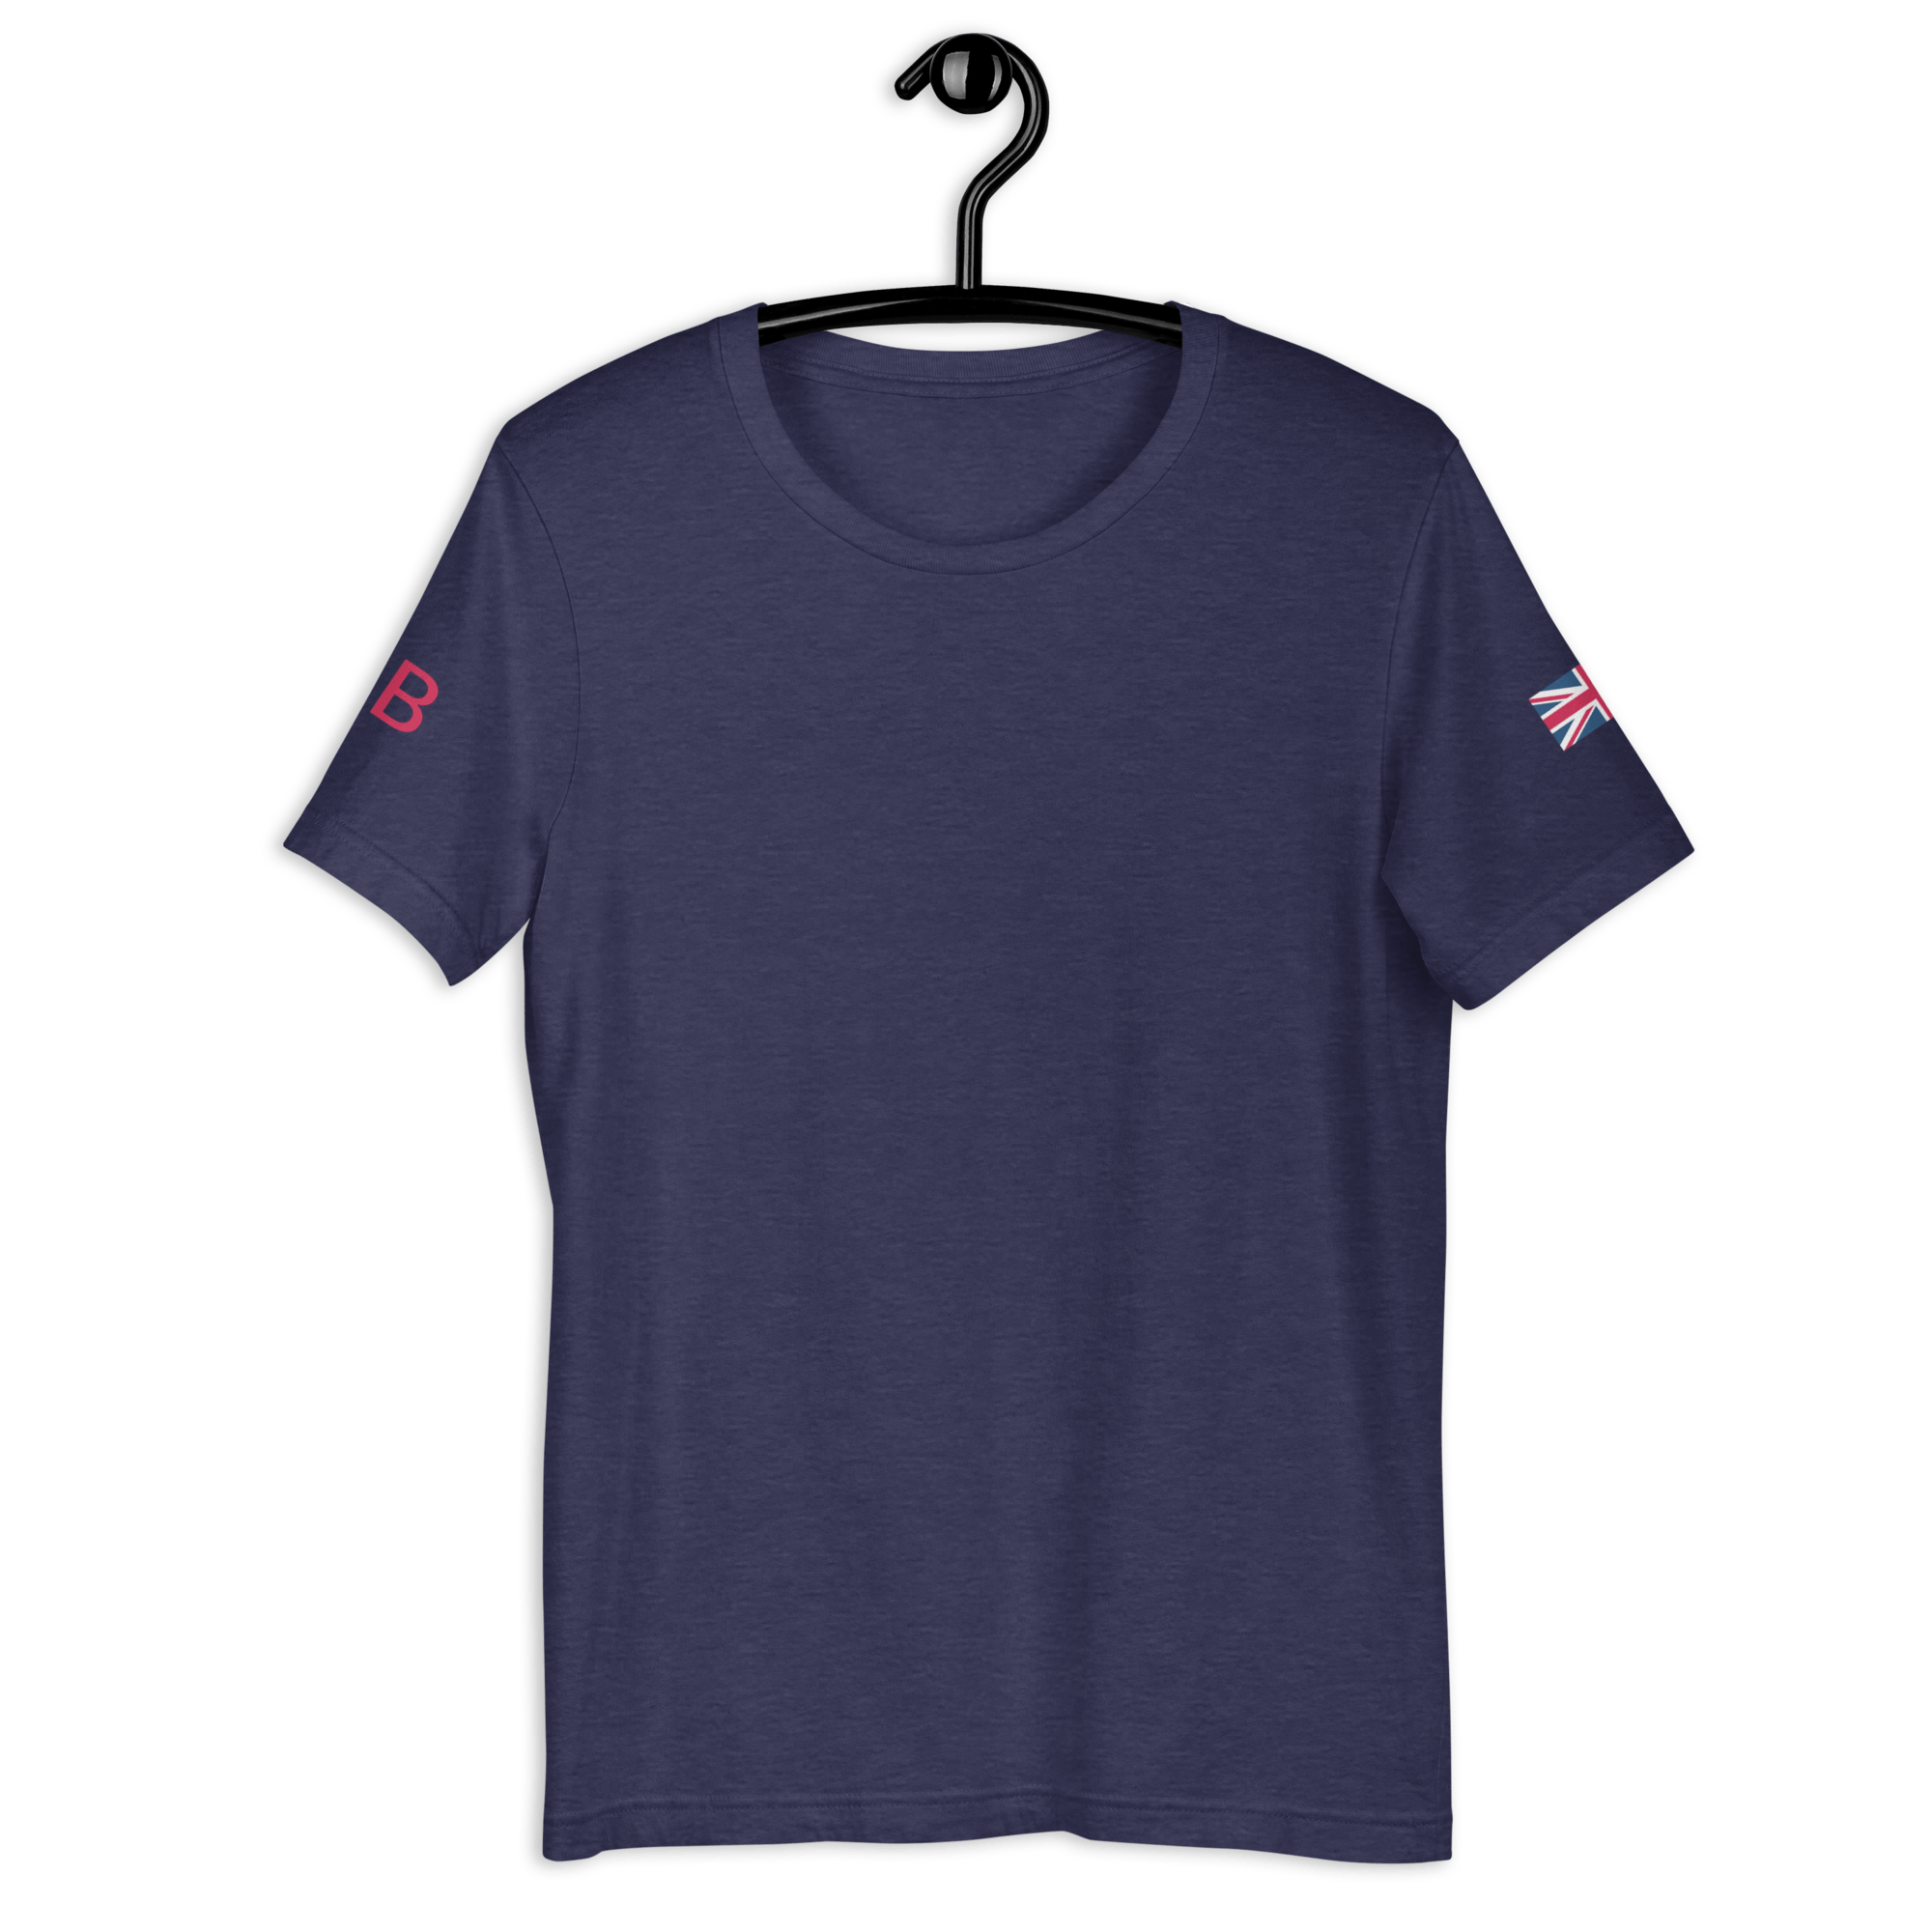 Union Jack GB T-shirt | Both Sleeves | Unisex Fit Heather Midnight Navy / XS Shirts & Tops Jolly & Goode